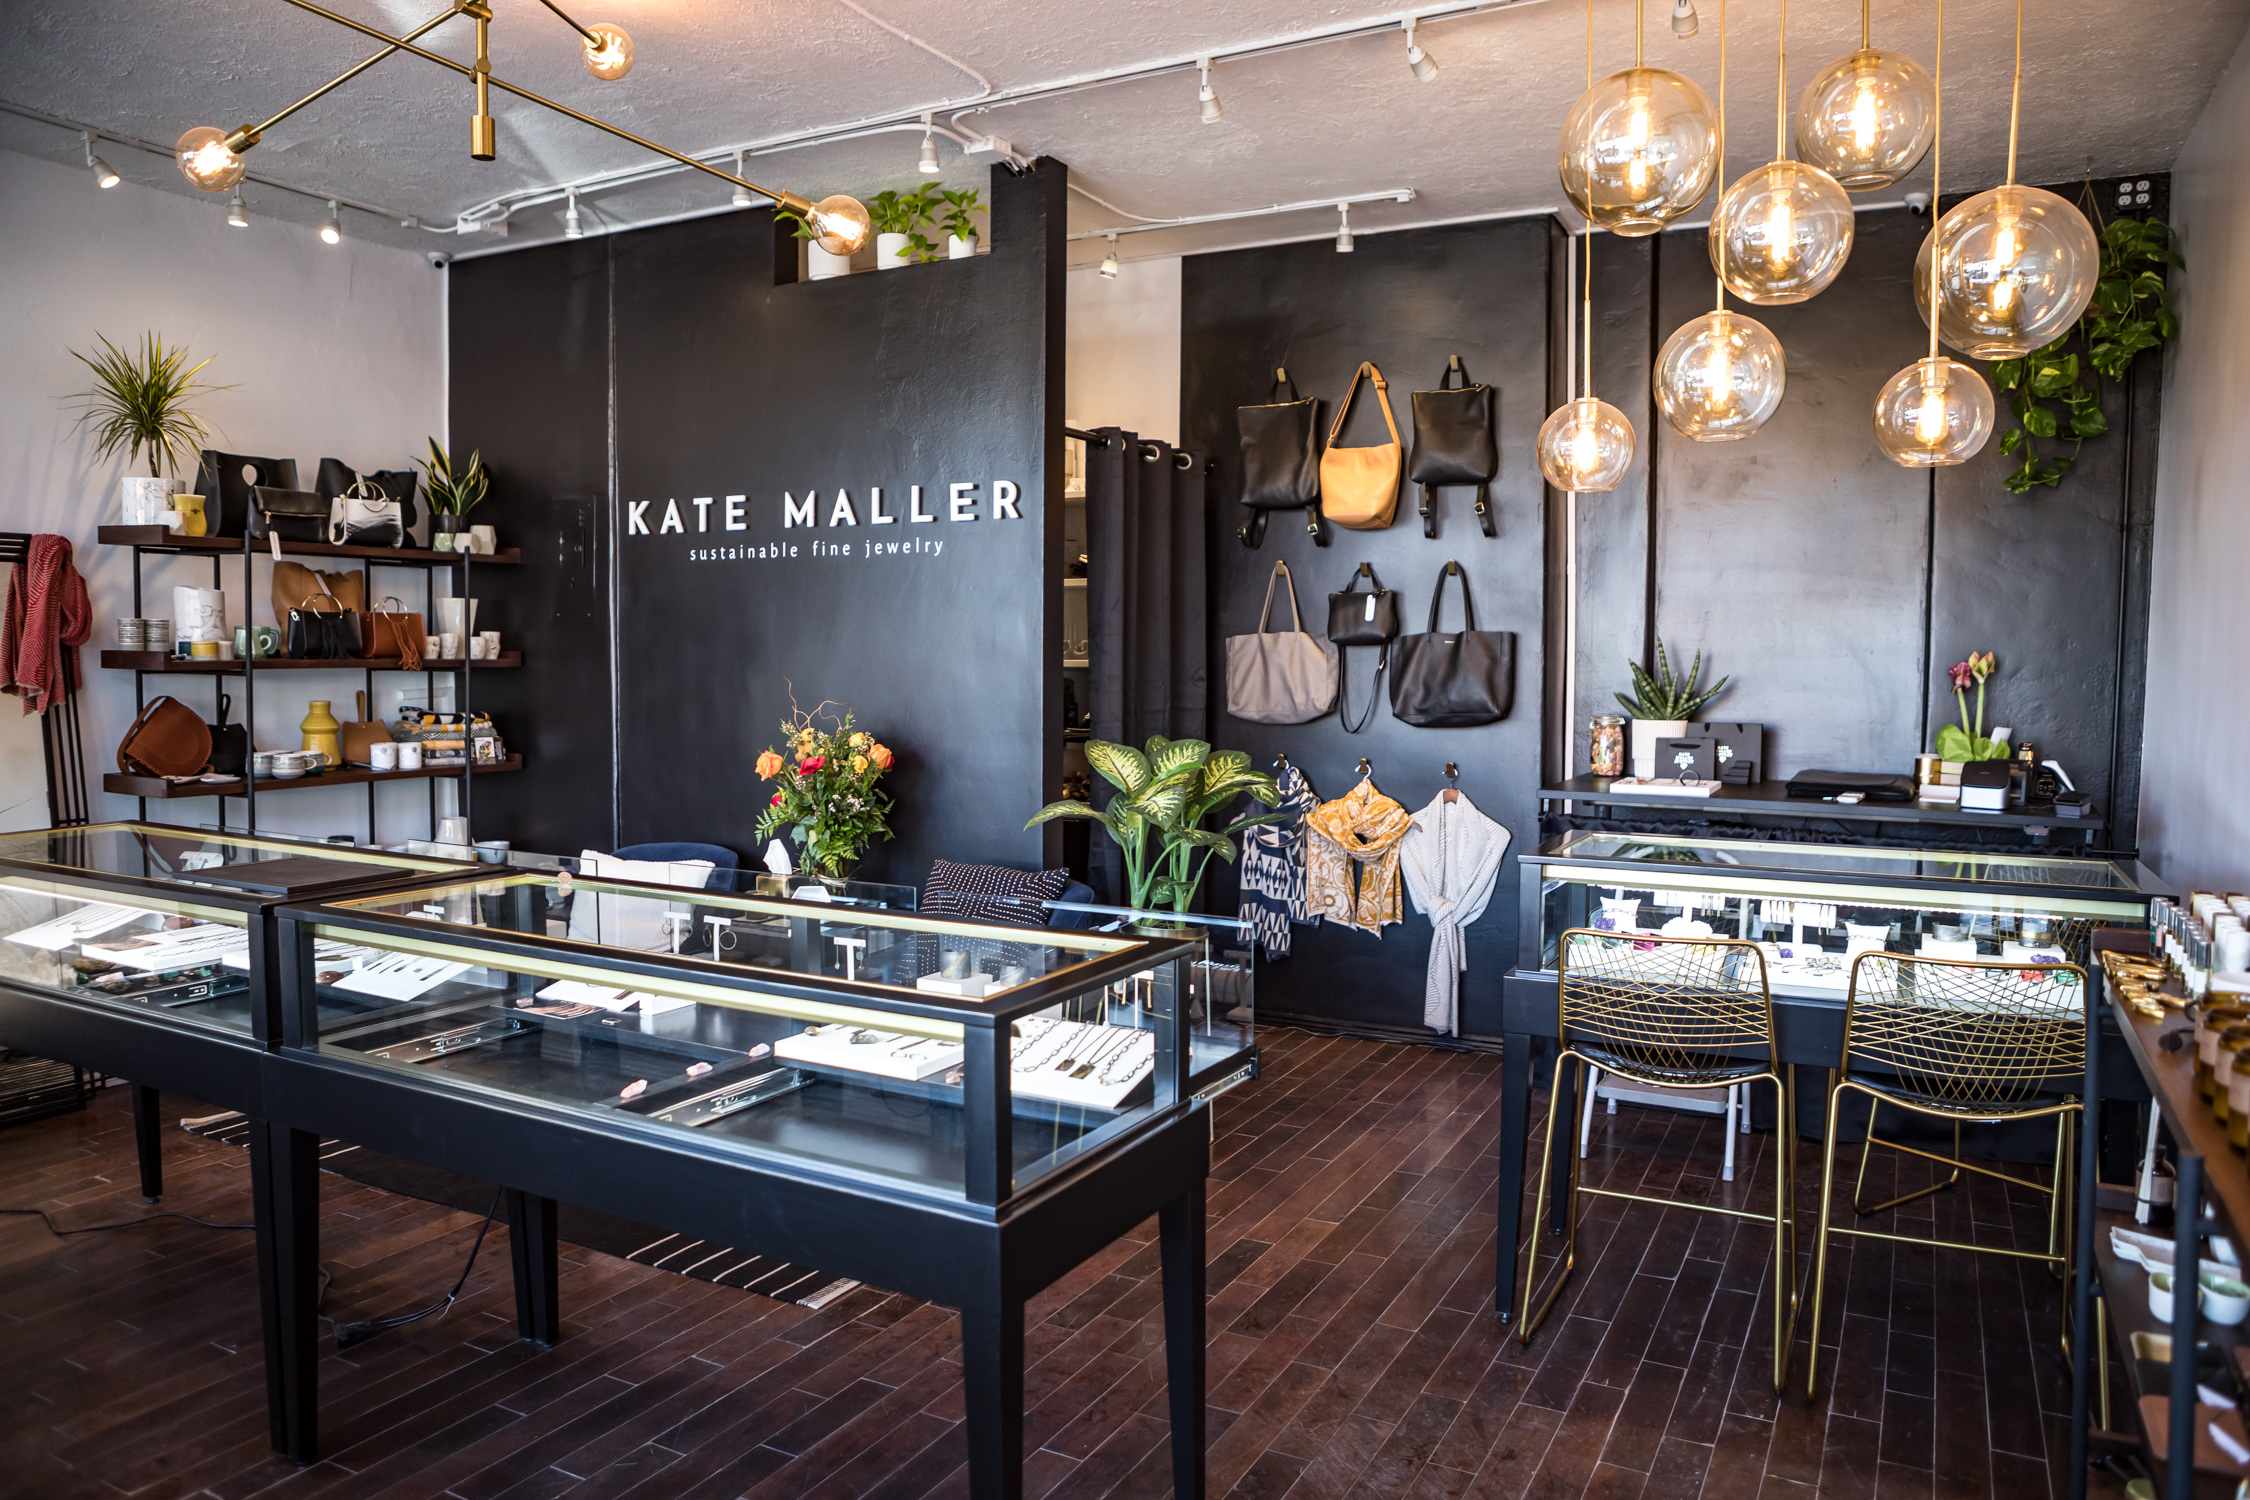 Kate Maller, Cheyenne Dickerson, Giacomo Di Franco, 303 Magazine, 303 design, 303 designer, Highlands, The Highlands, sustainability, sustainable, jewelry, Denver jewelry, Denver jewelry designer, Denver jewelry design